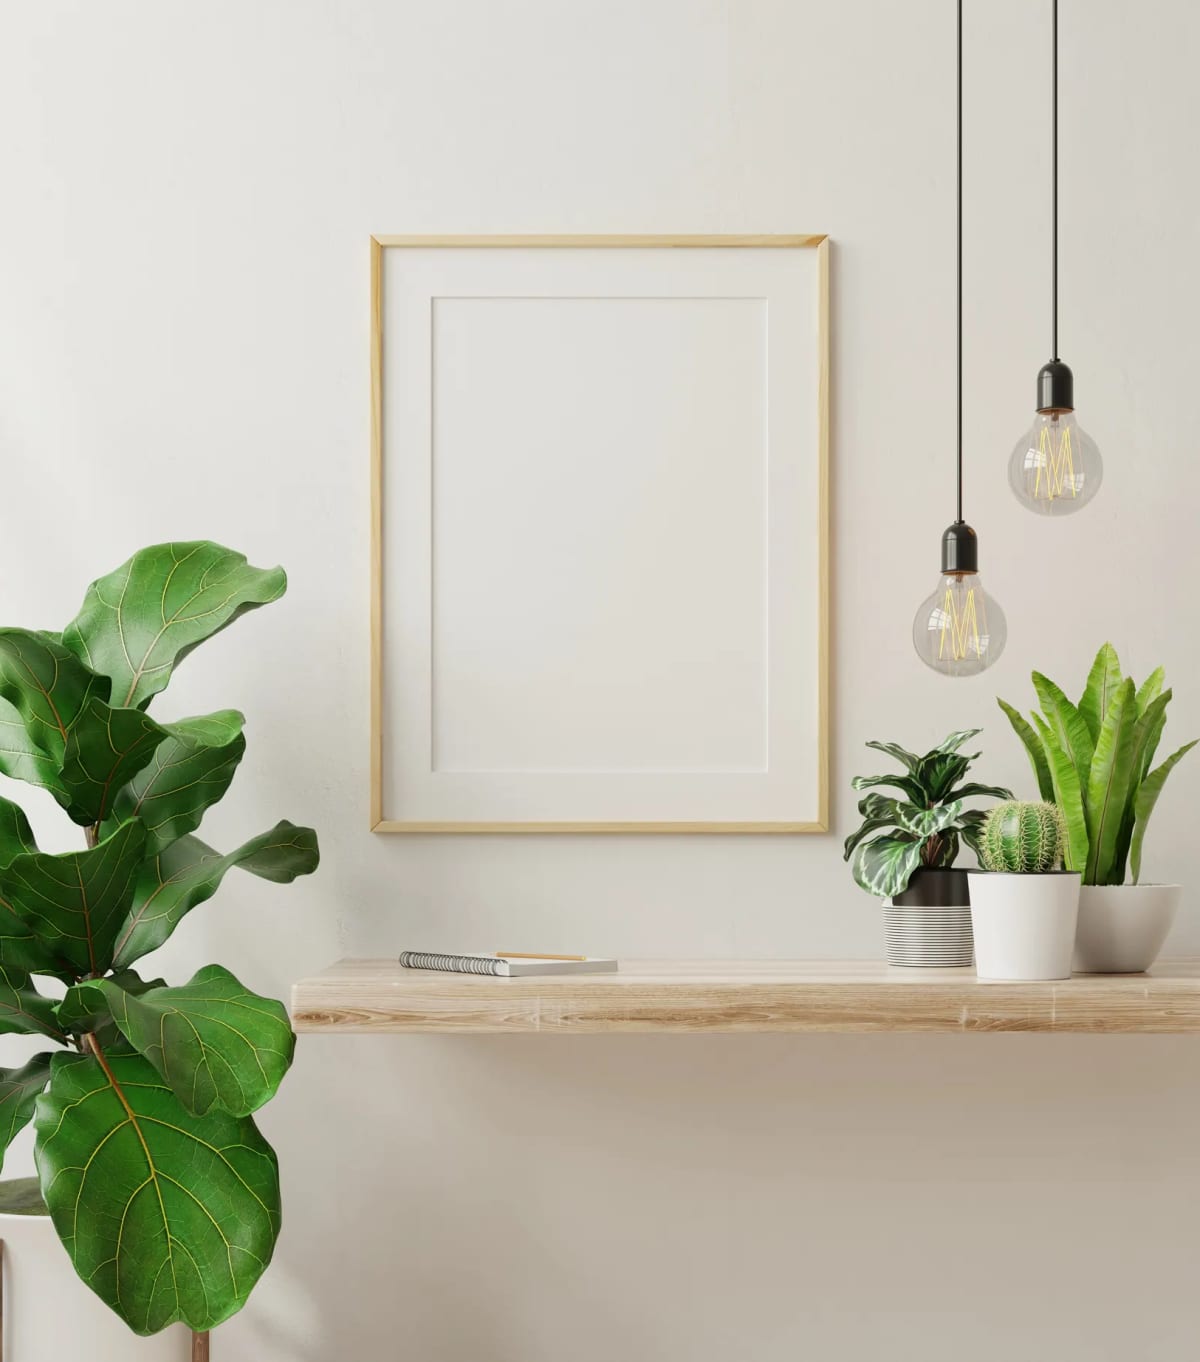 An empty picture frame displayed on a beige wall